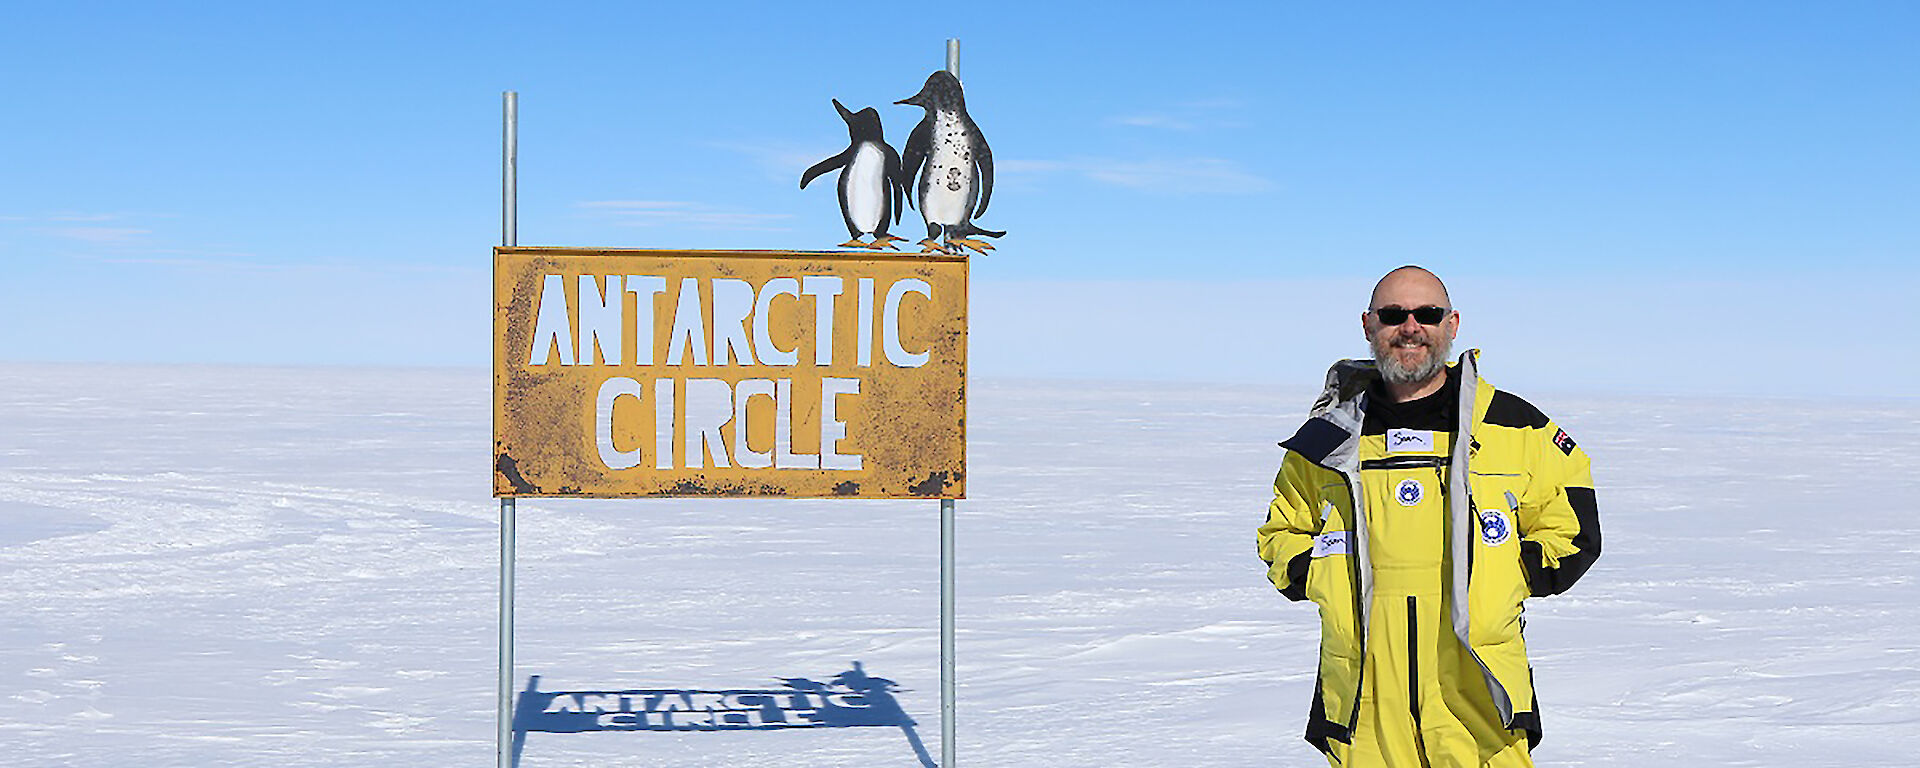 An expeditioner stands next to a sign that says "Antarctic Circle".